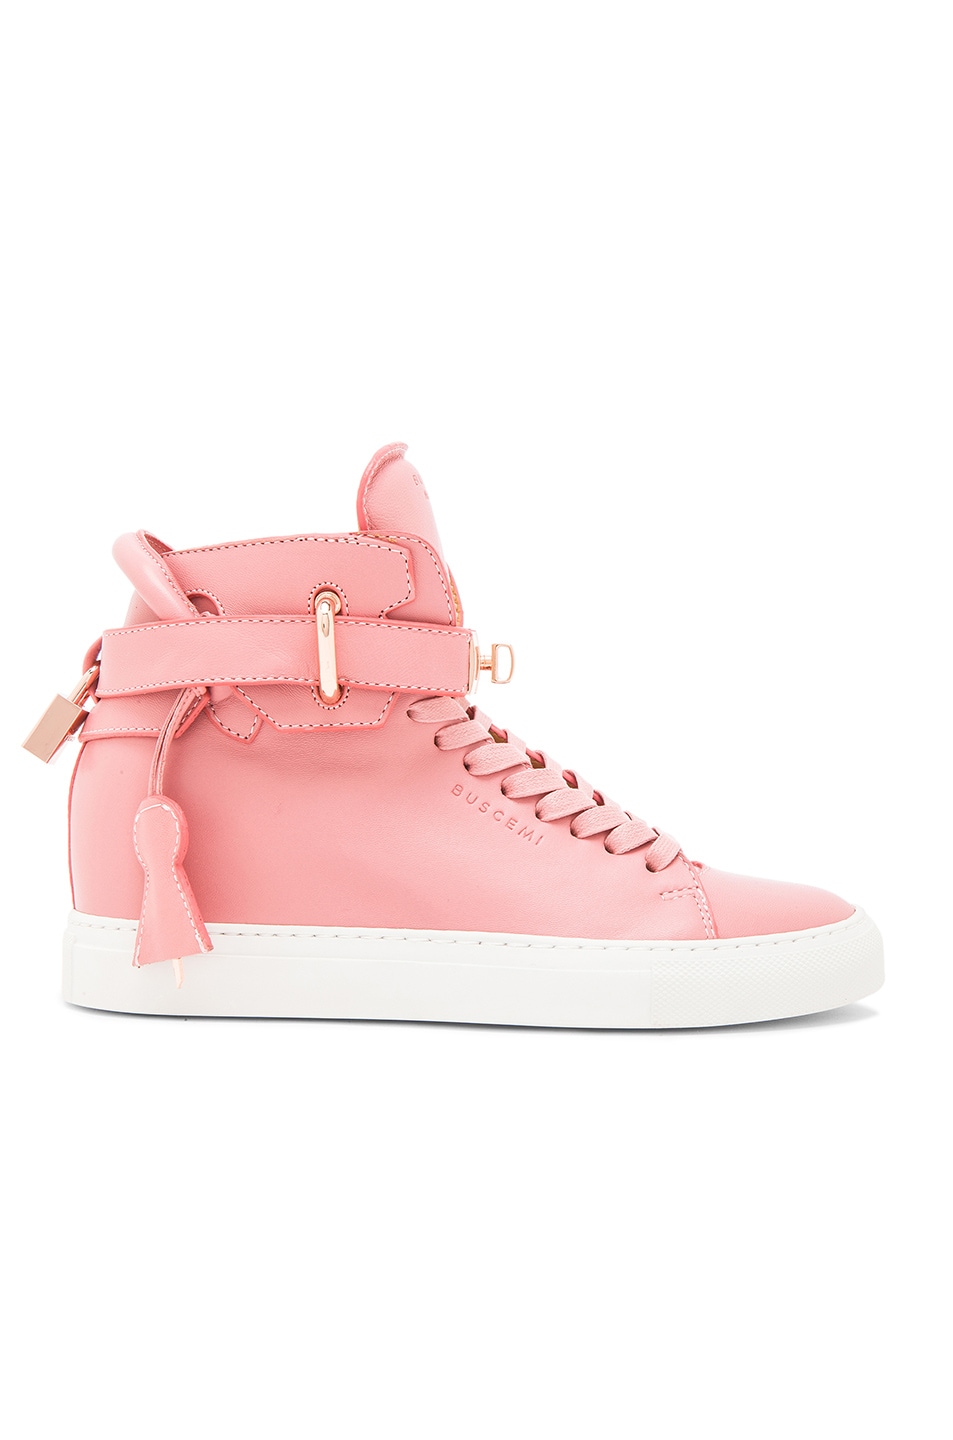 Buscemi 100MM Alta High Top Leather Sneakers in Coral | FWRD